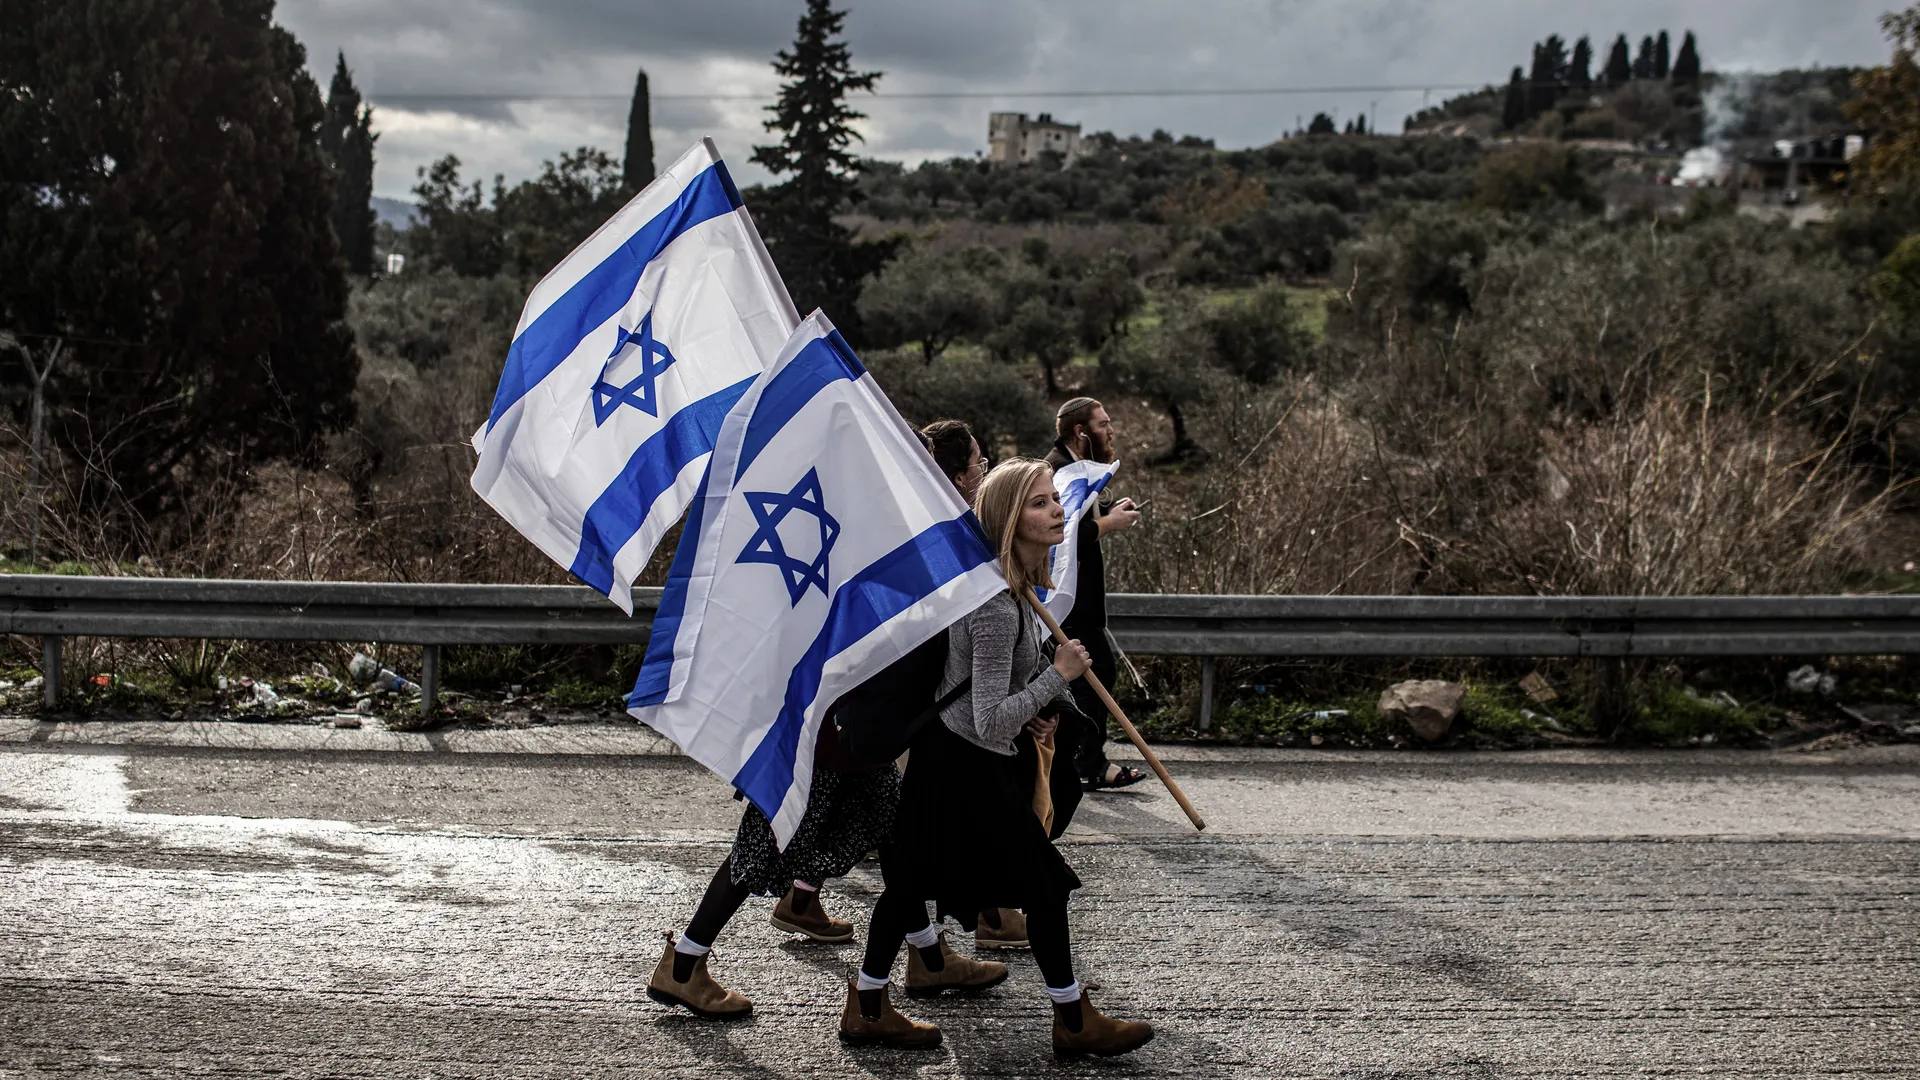 European Union joins in sanctioning groups associated with violent settlers (Credits: Getty Images)